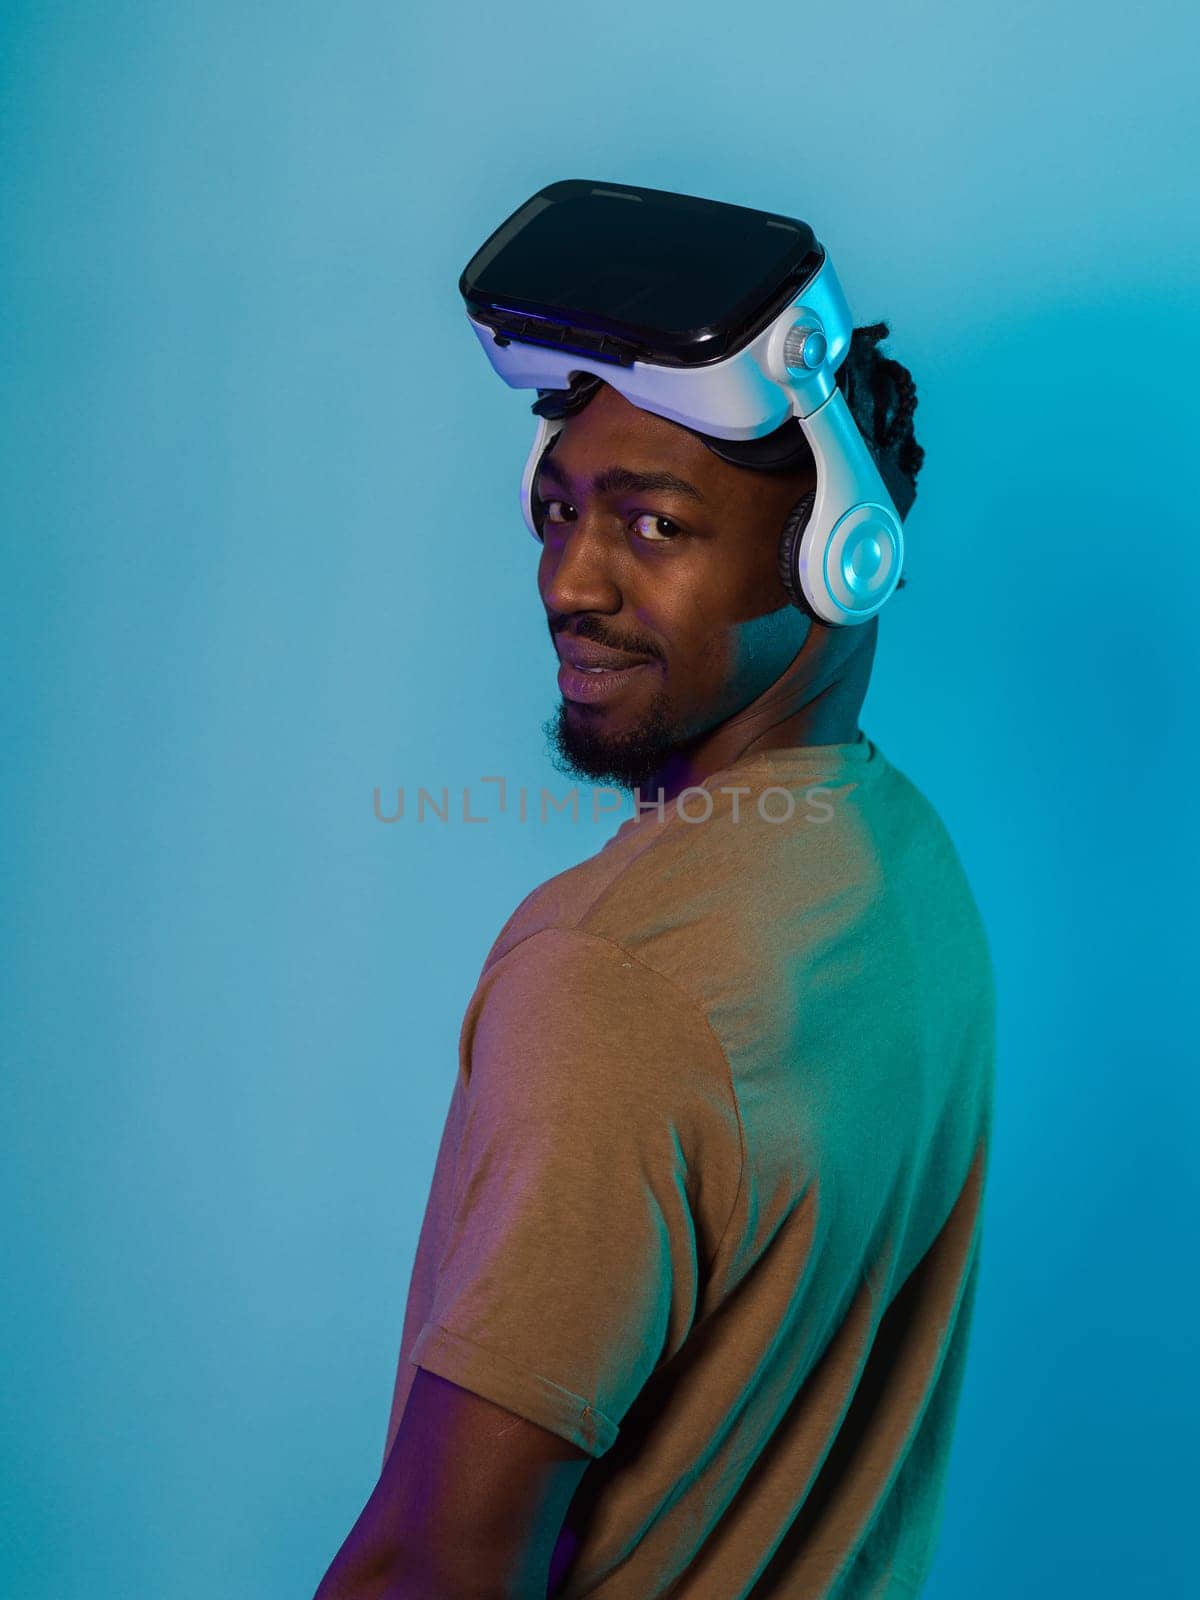 In a futuristic visual, an African American man stands isolated against a striking blue backdrop, adorned with VR glasses that transport him into a cutting-edge virtual reality experience, merging technology and innovation in a contemporary display by dotshock